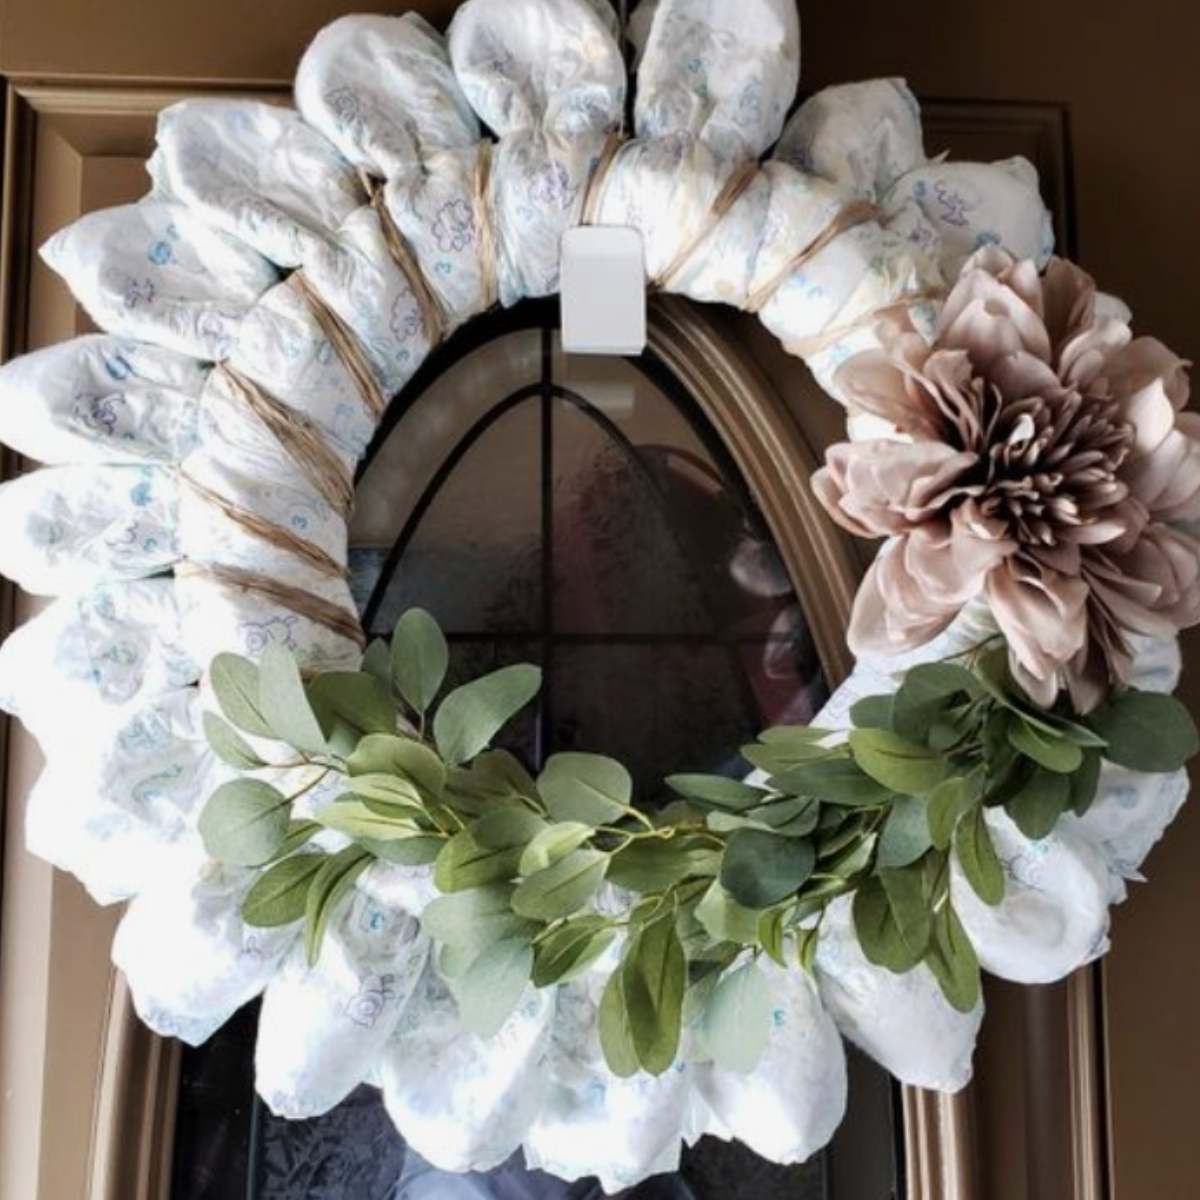 How to Make Diaper Wreaths